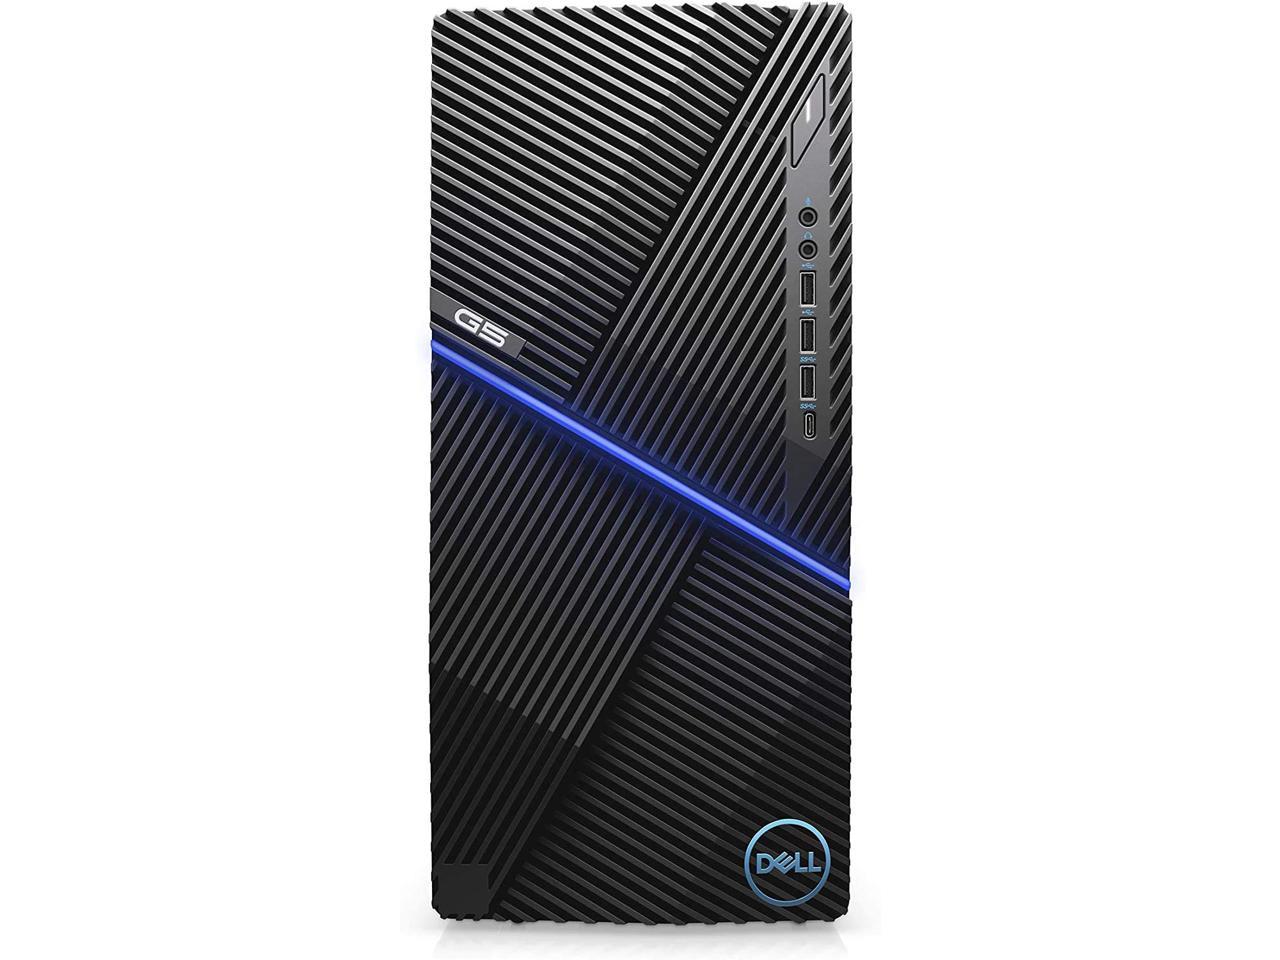 Dell Inspiron G5 5090 Home and Entertainment Gaming Desktop PC, 10th